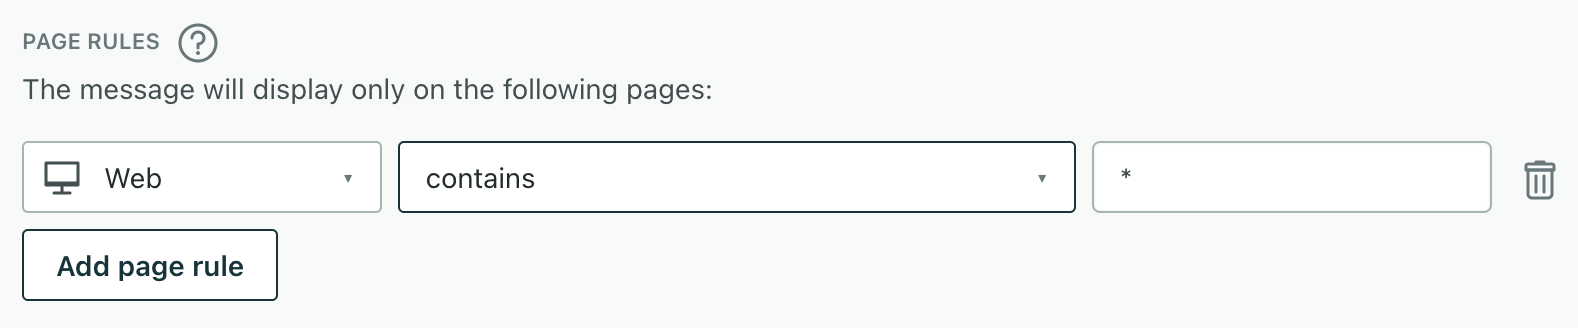 set in-app page rules to limit a message to a platform